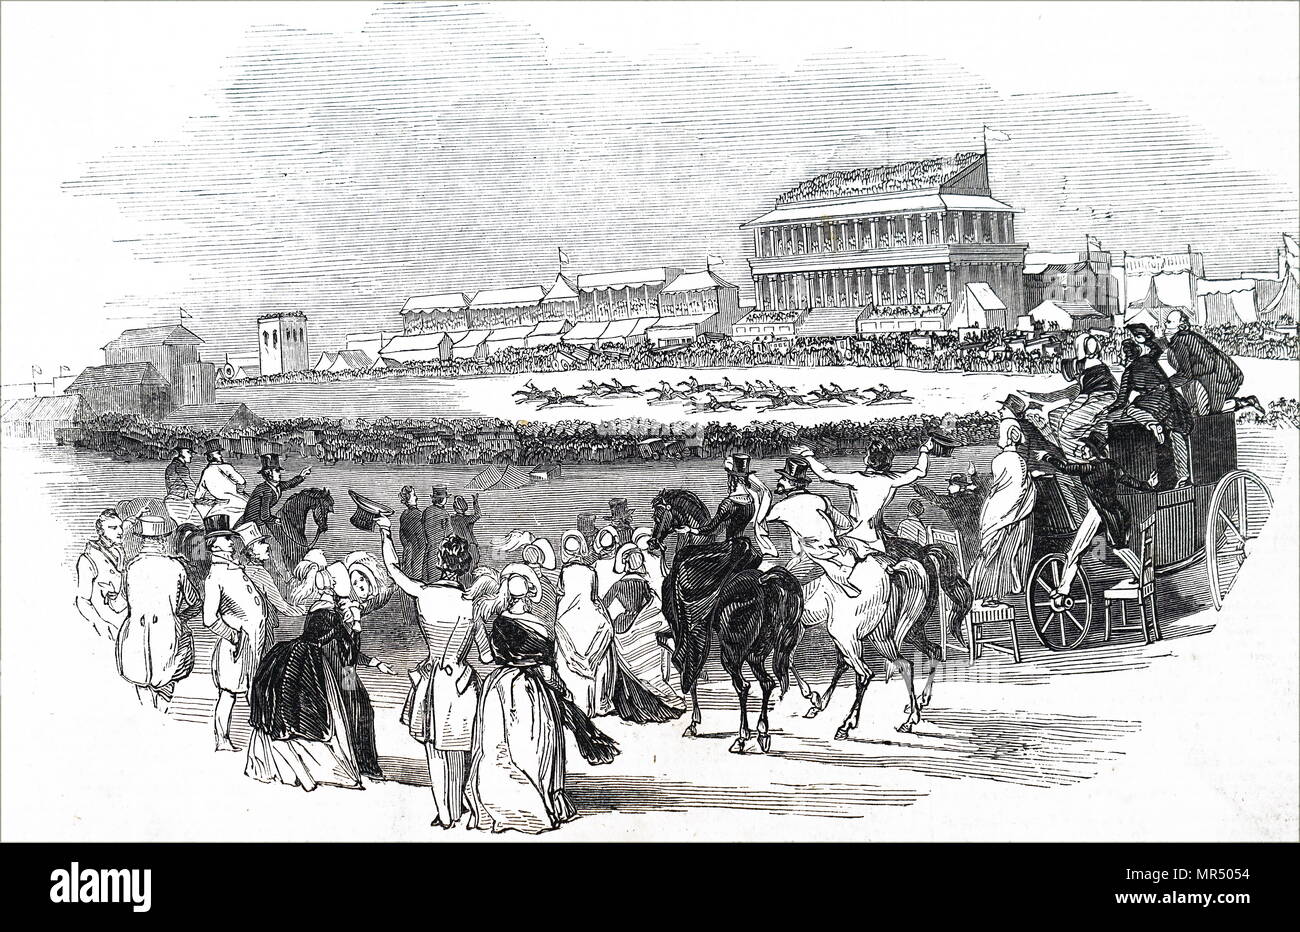 Illustration depicting the horse racing at Epson Racecourse. Dated 19th century Stock Photo